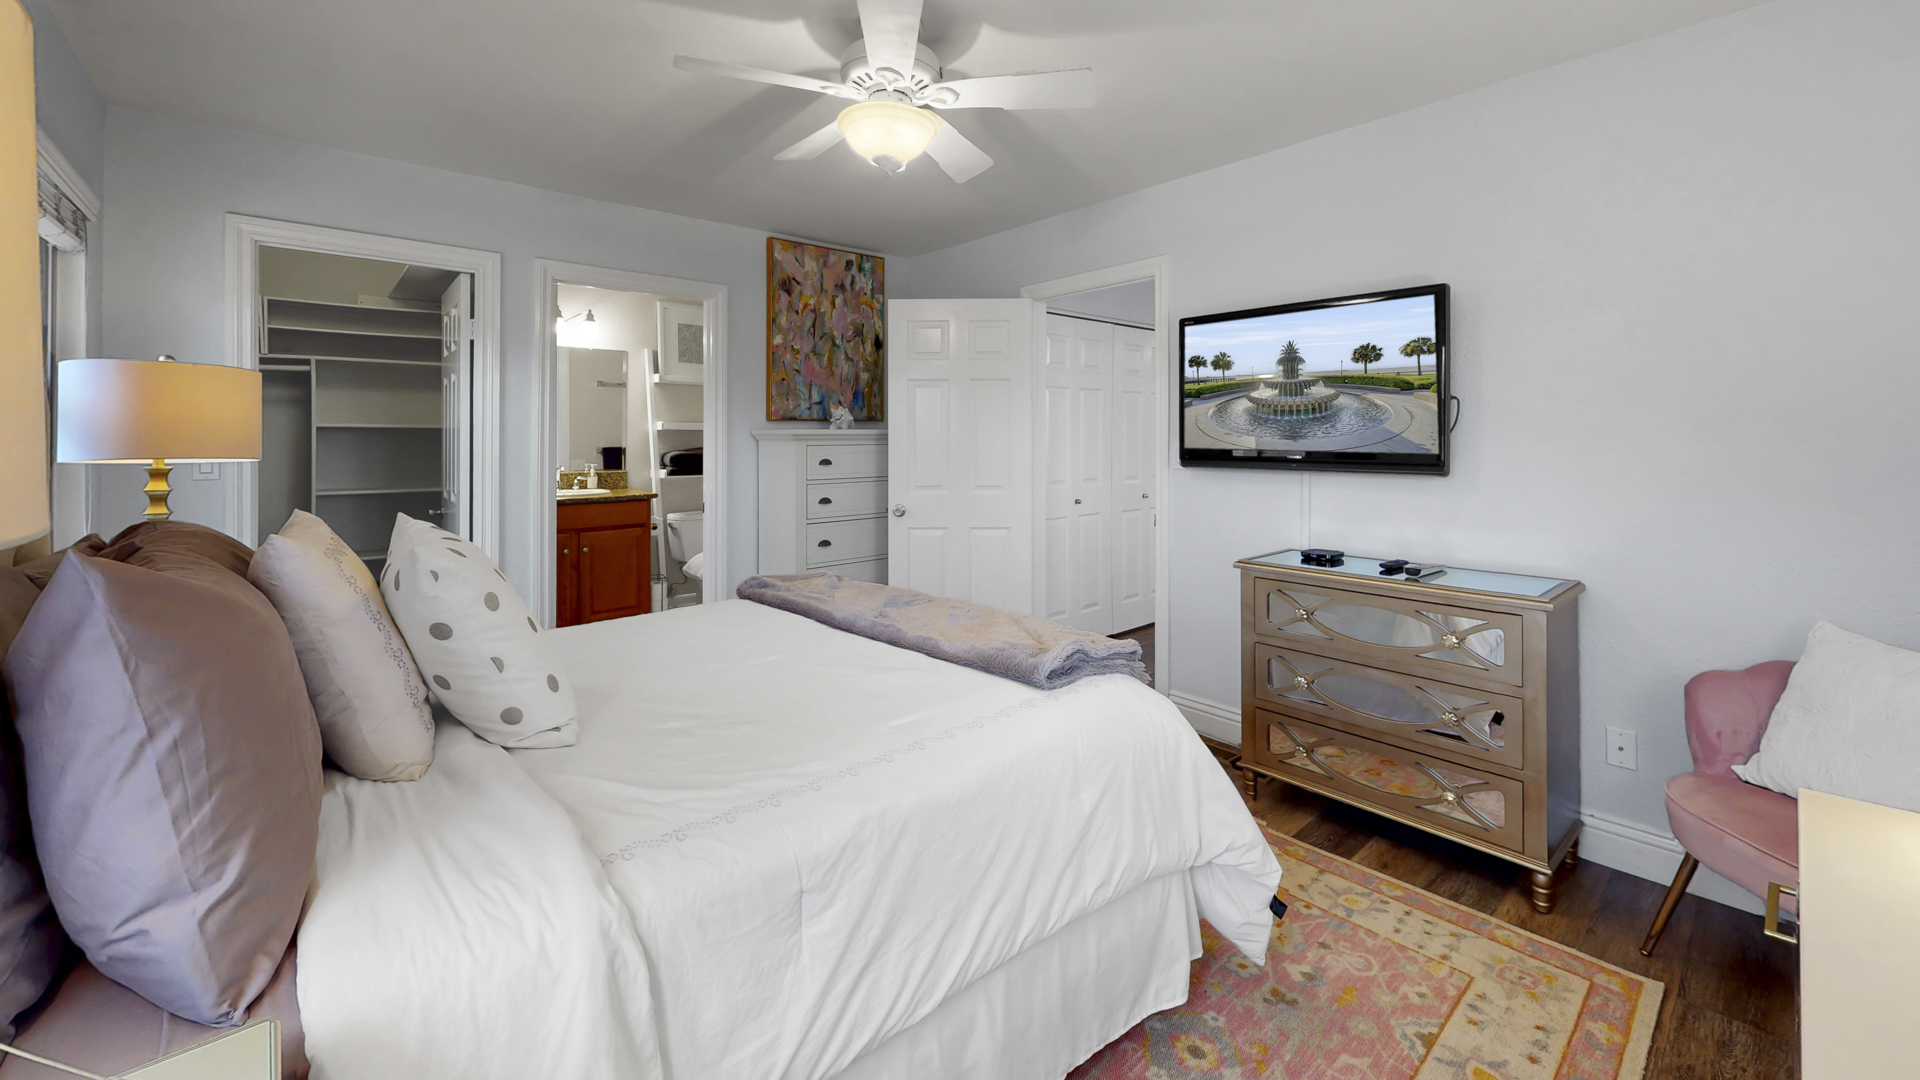 The second master bedroom has a large walk-in closet, in-suite bathroom and TV with Roku